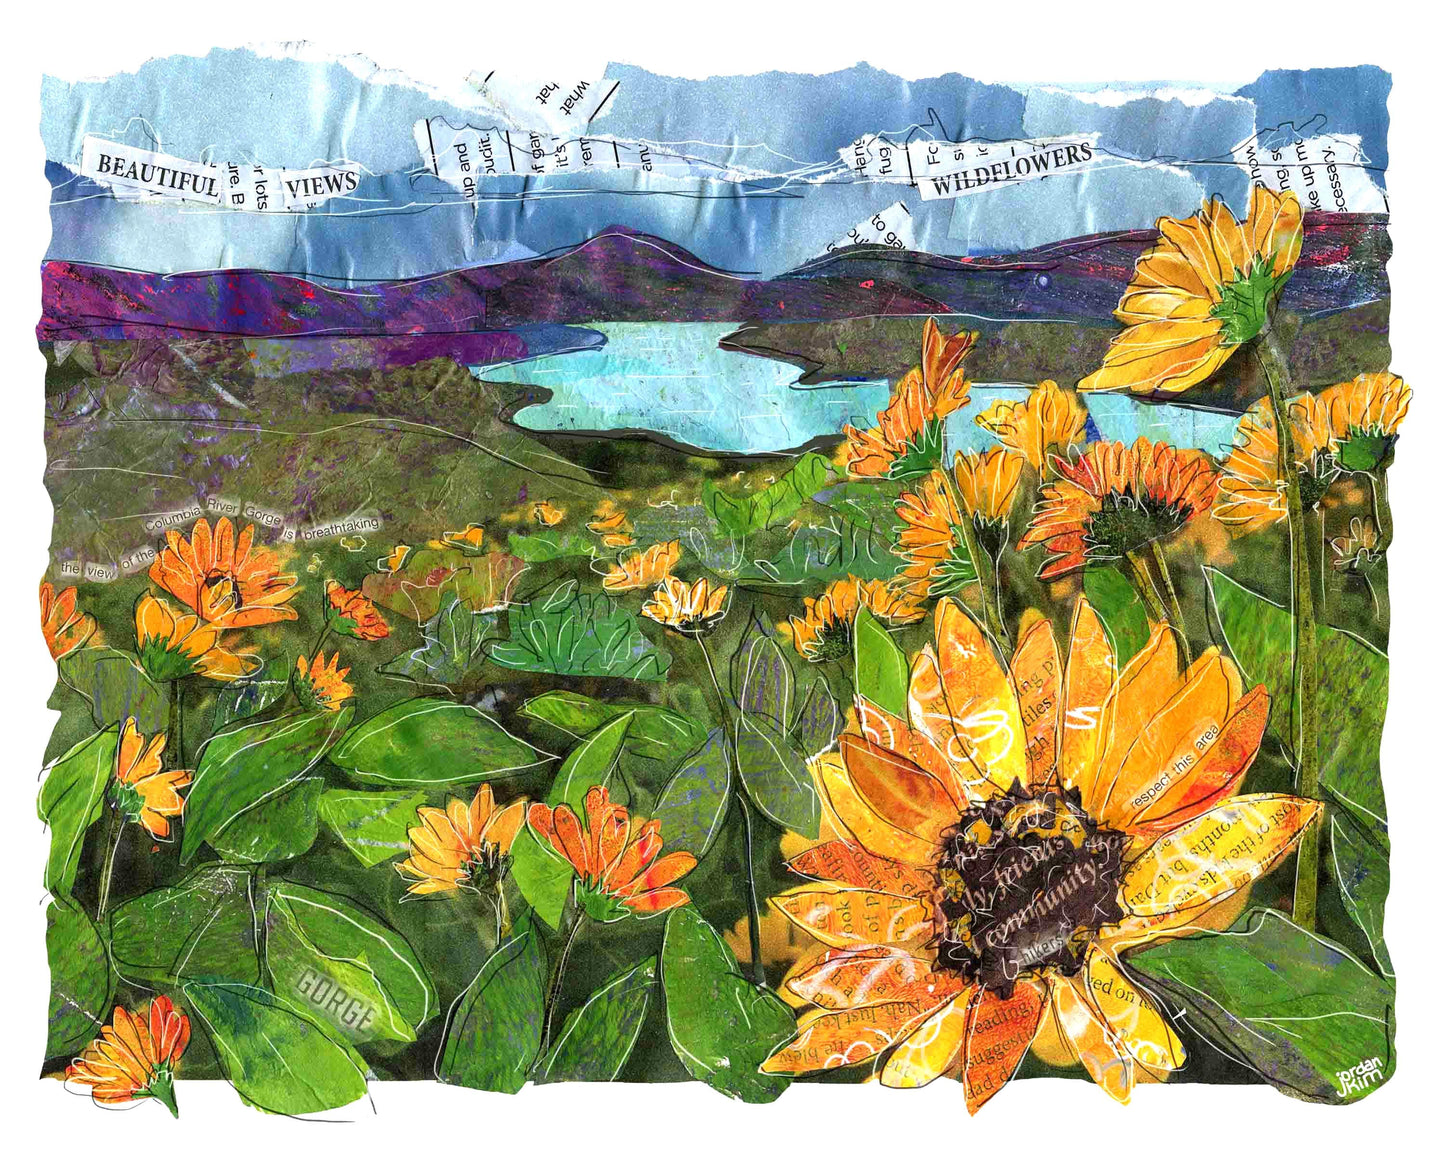 Greeting Card of a Paper Collage of Balsam Root wildflowers blooming in the Columbia River Gorge - Inspirational - Blank Inside